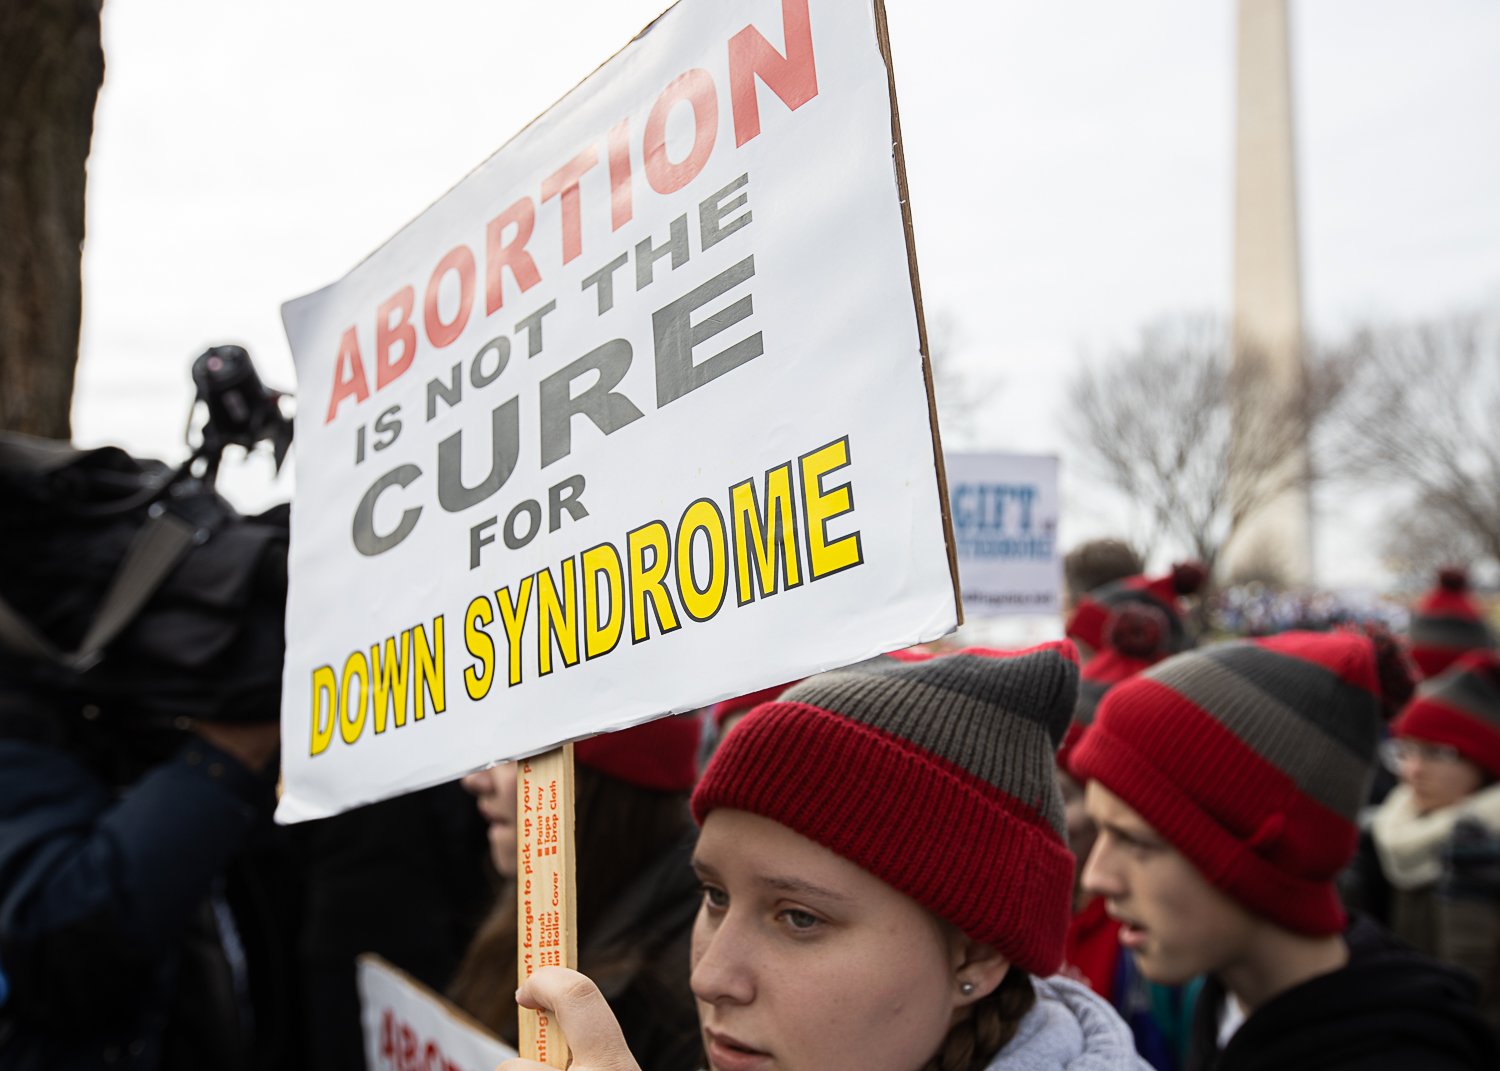 march for life downs syndrome